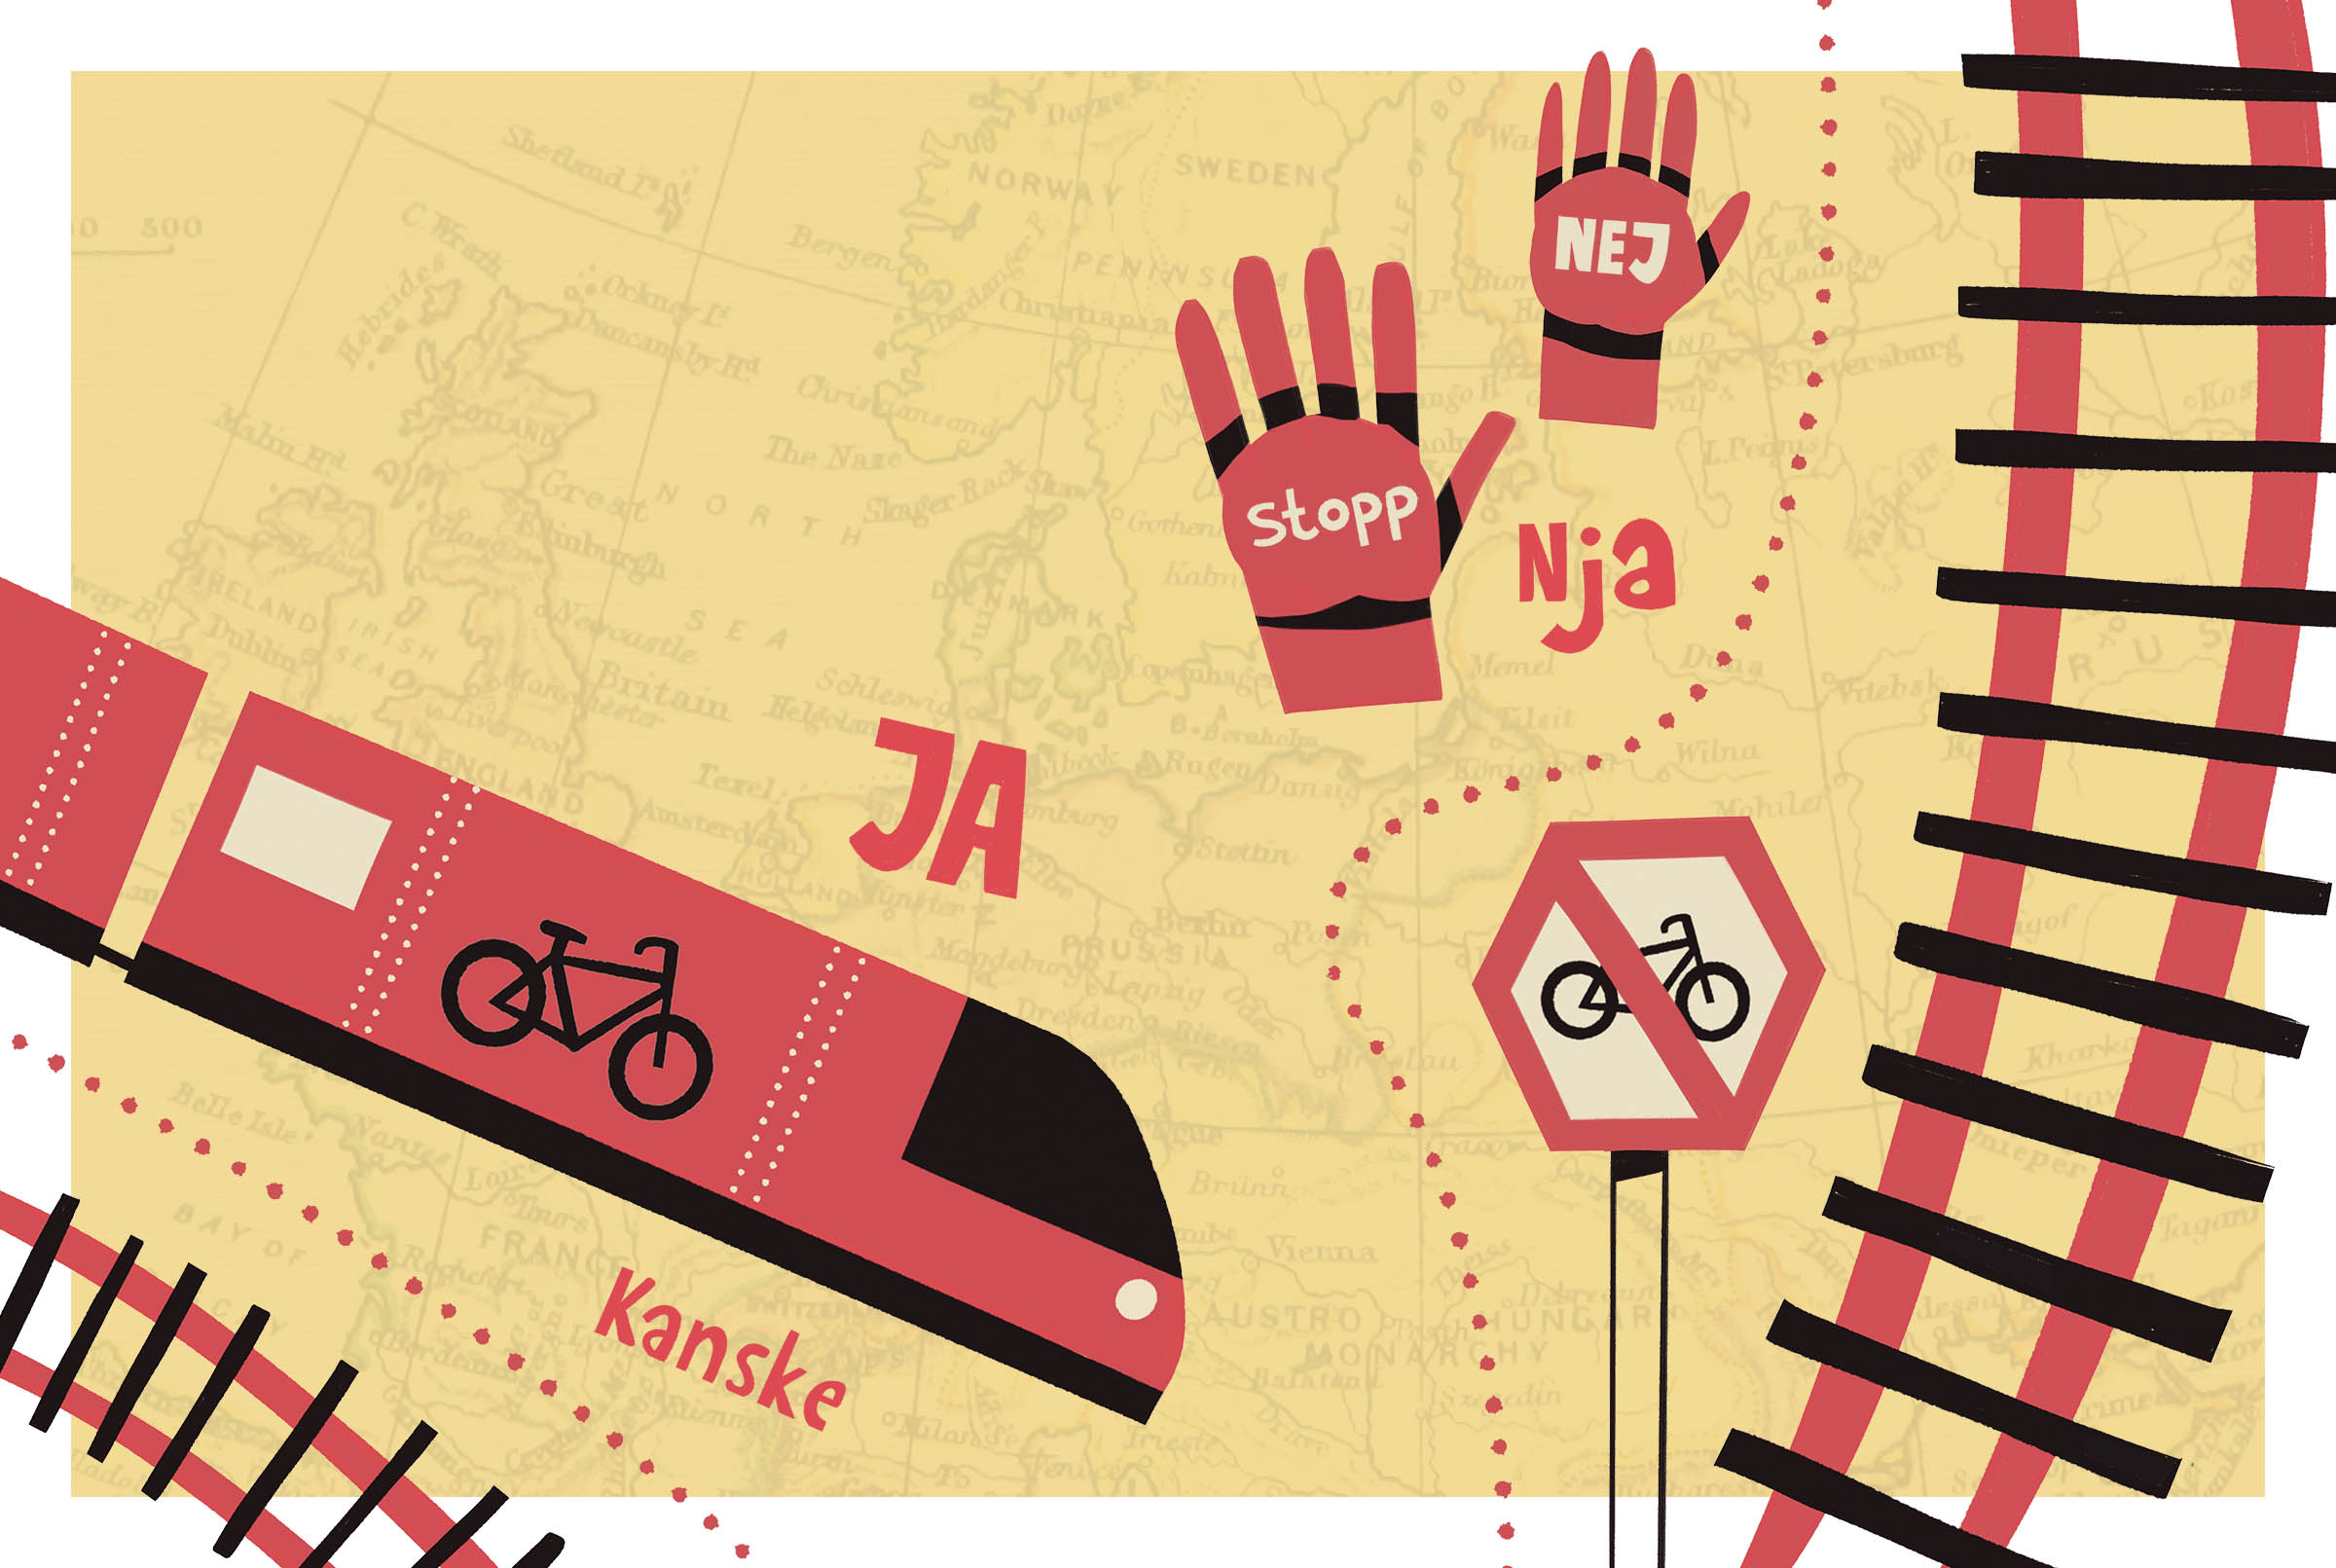 A train, railway and hands on top of a European map. You also see a that tells us that bikes are forbidden, as well as several words saying "yes", "no" and "maybe".